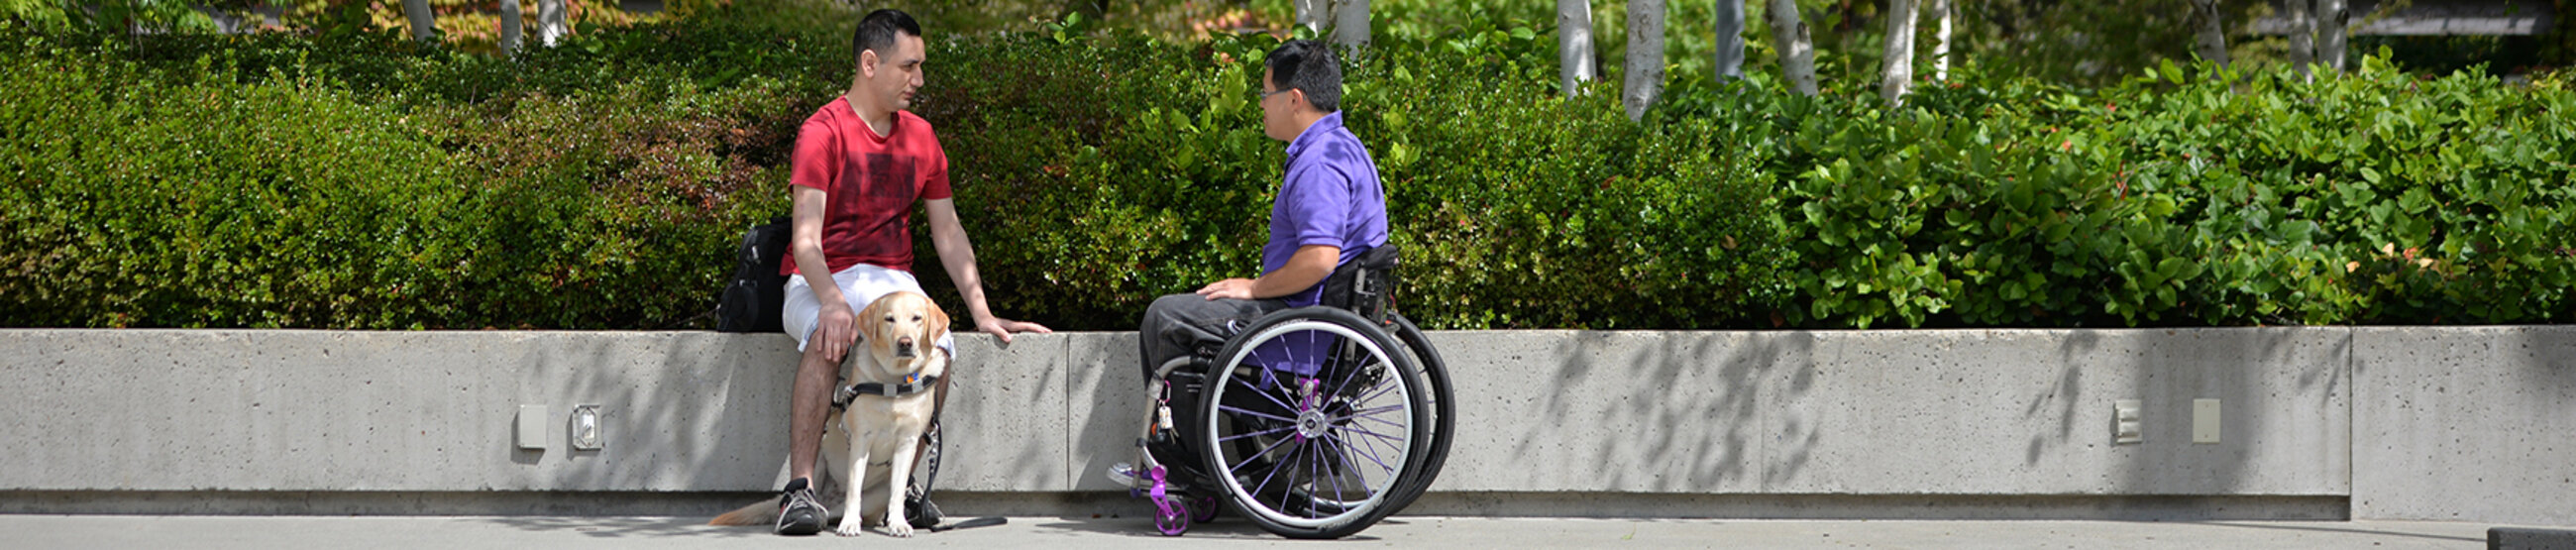 A person with a guide dog and a person using a wheelchair outside having a conversation near a bush.